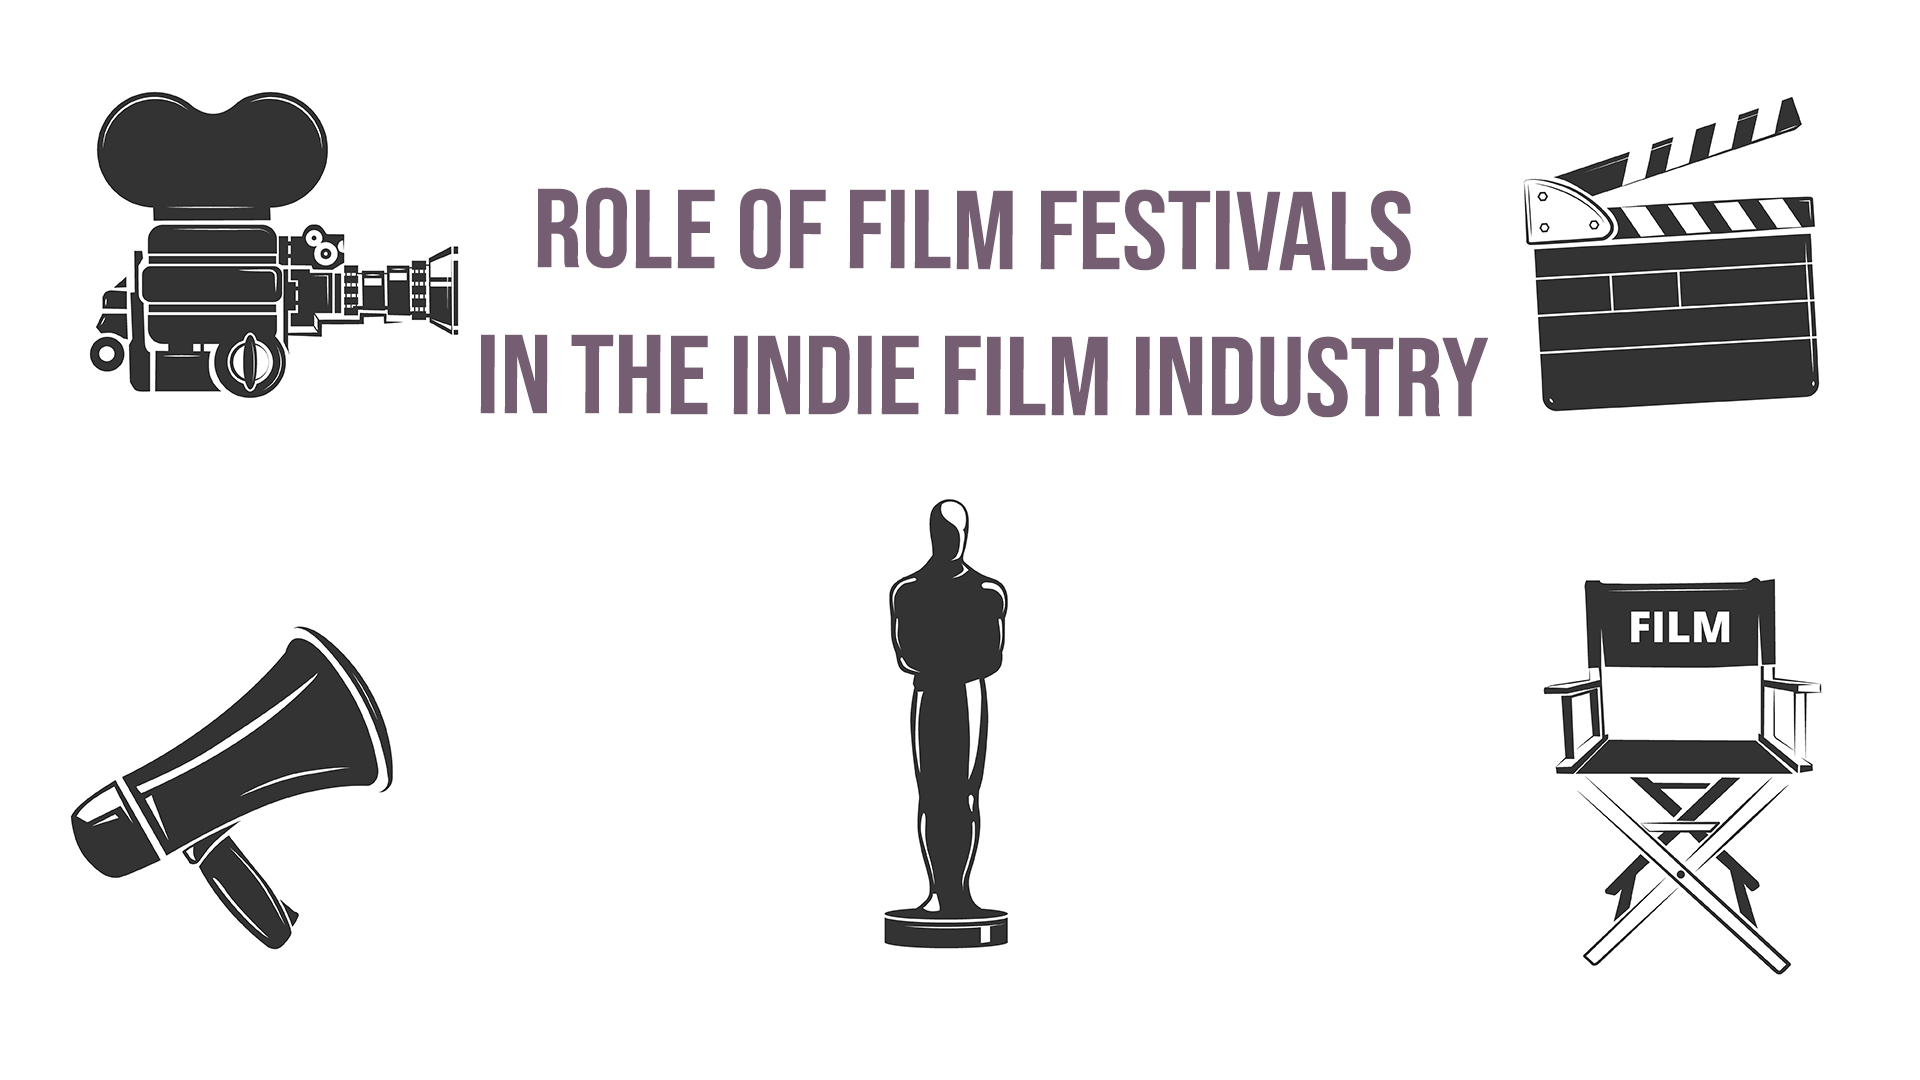 Film Festivals and its impact on Independent Films